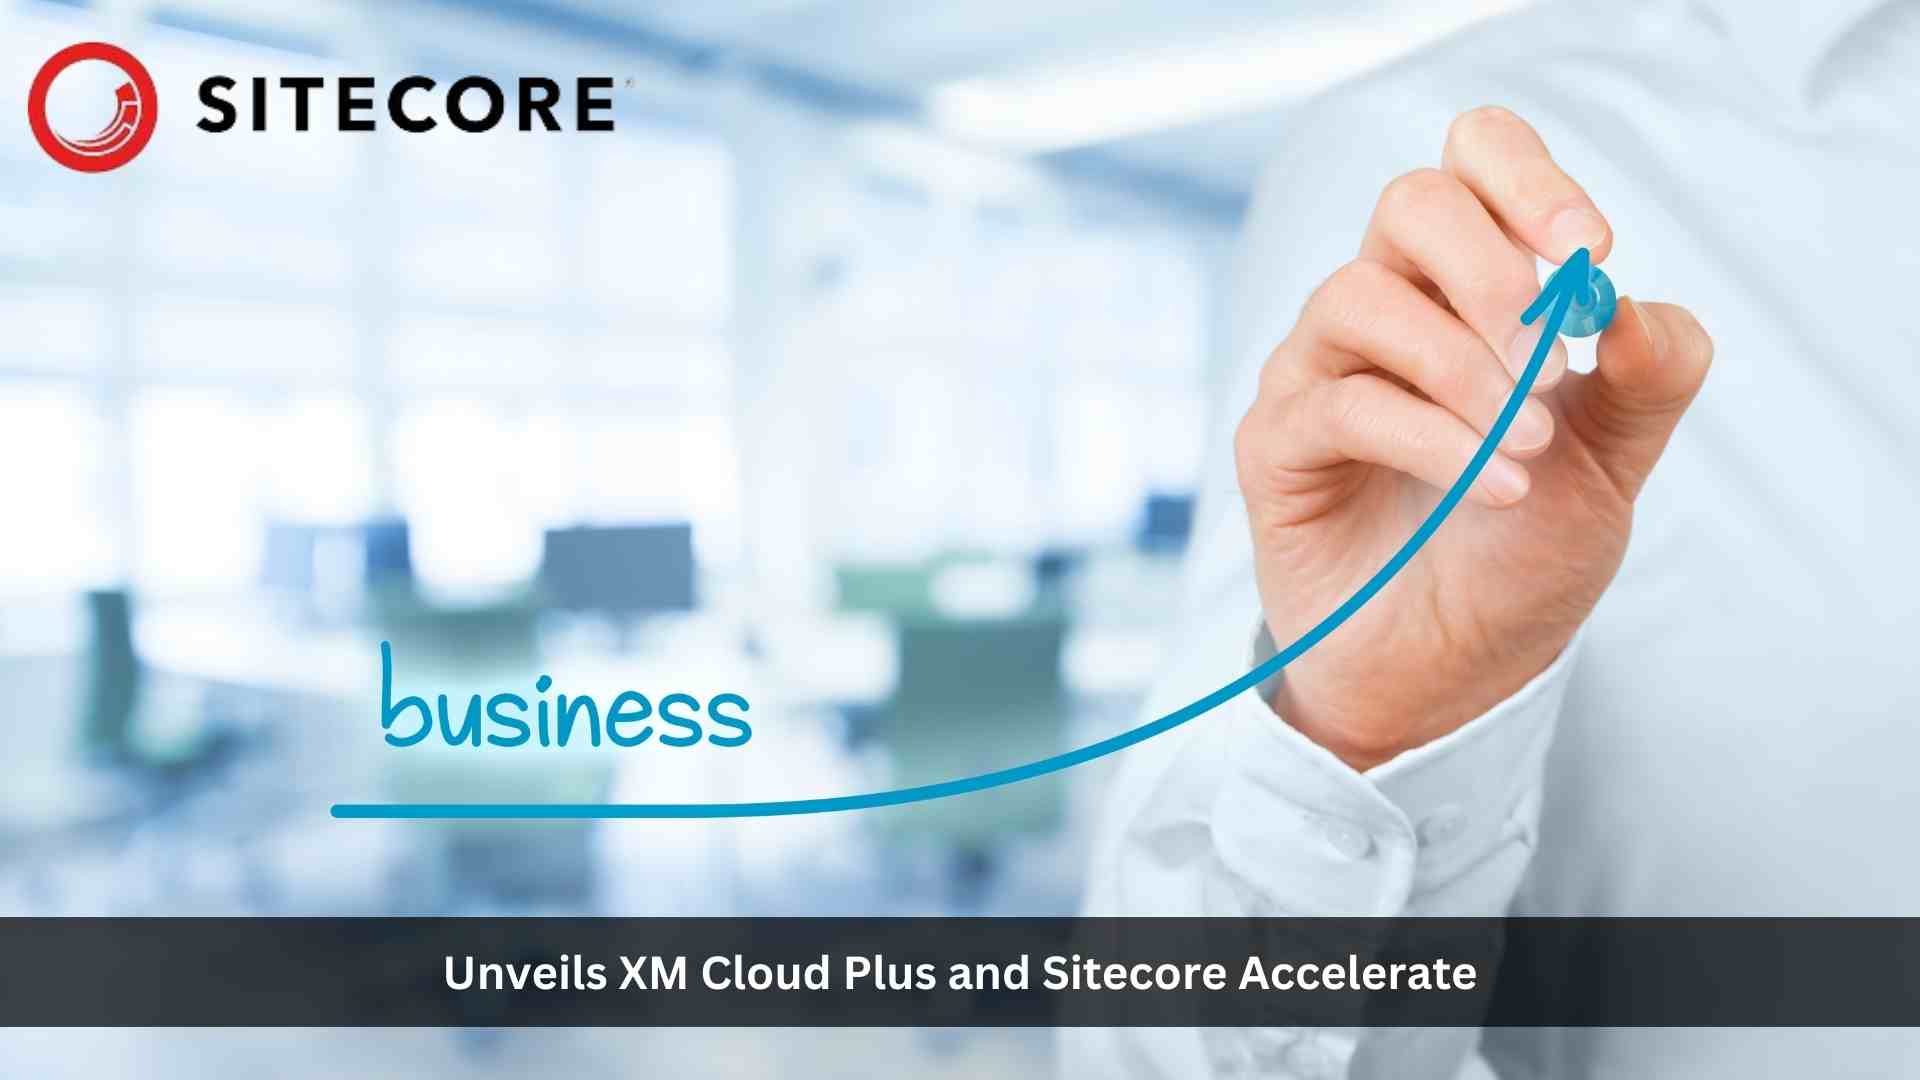 Sitecore unveils XM Cloud Plus and Sitecore Accelerate to help brands accelerate their cloud transition